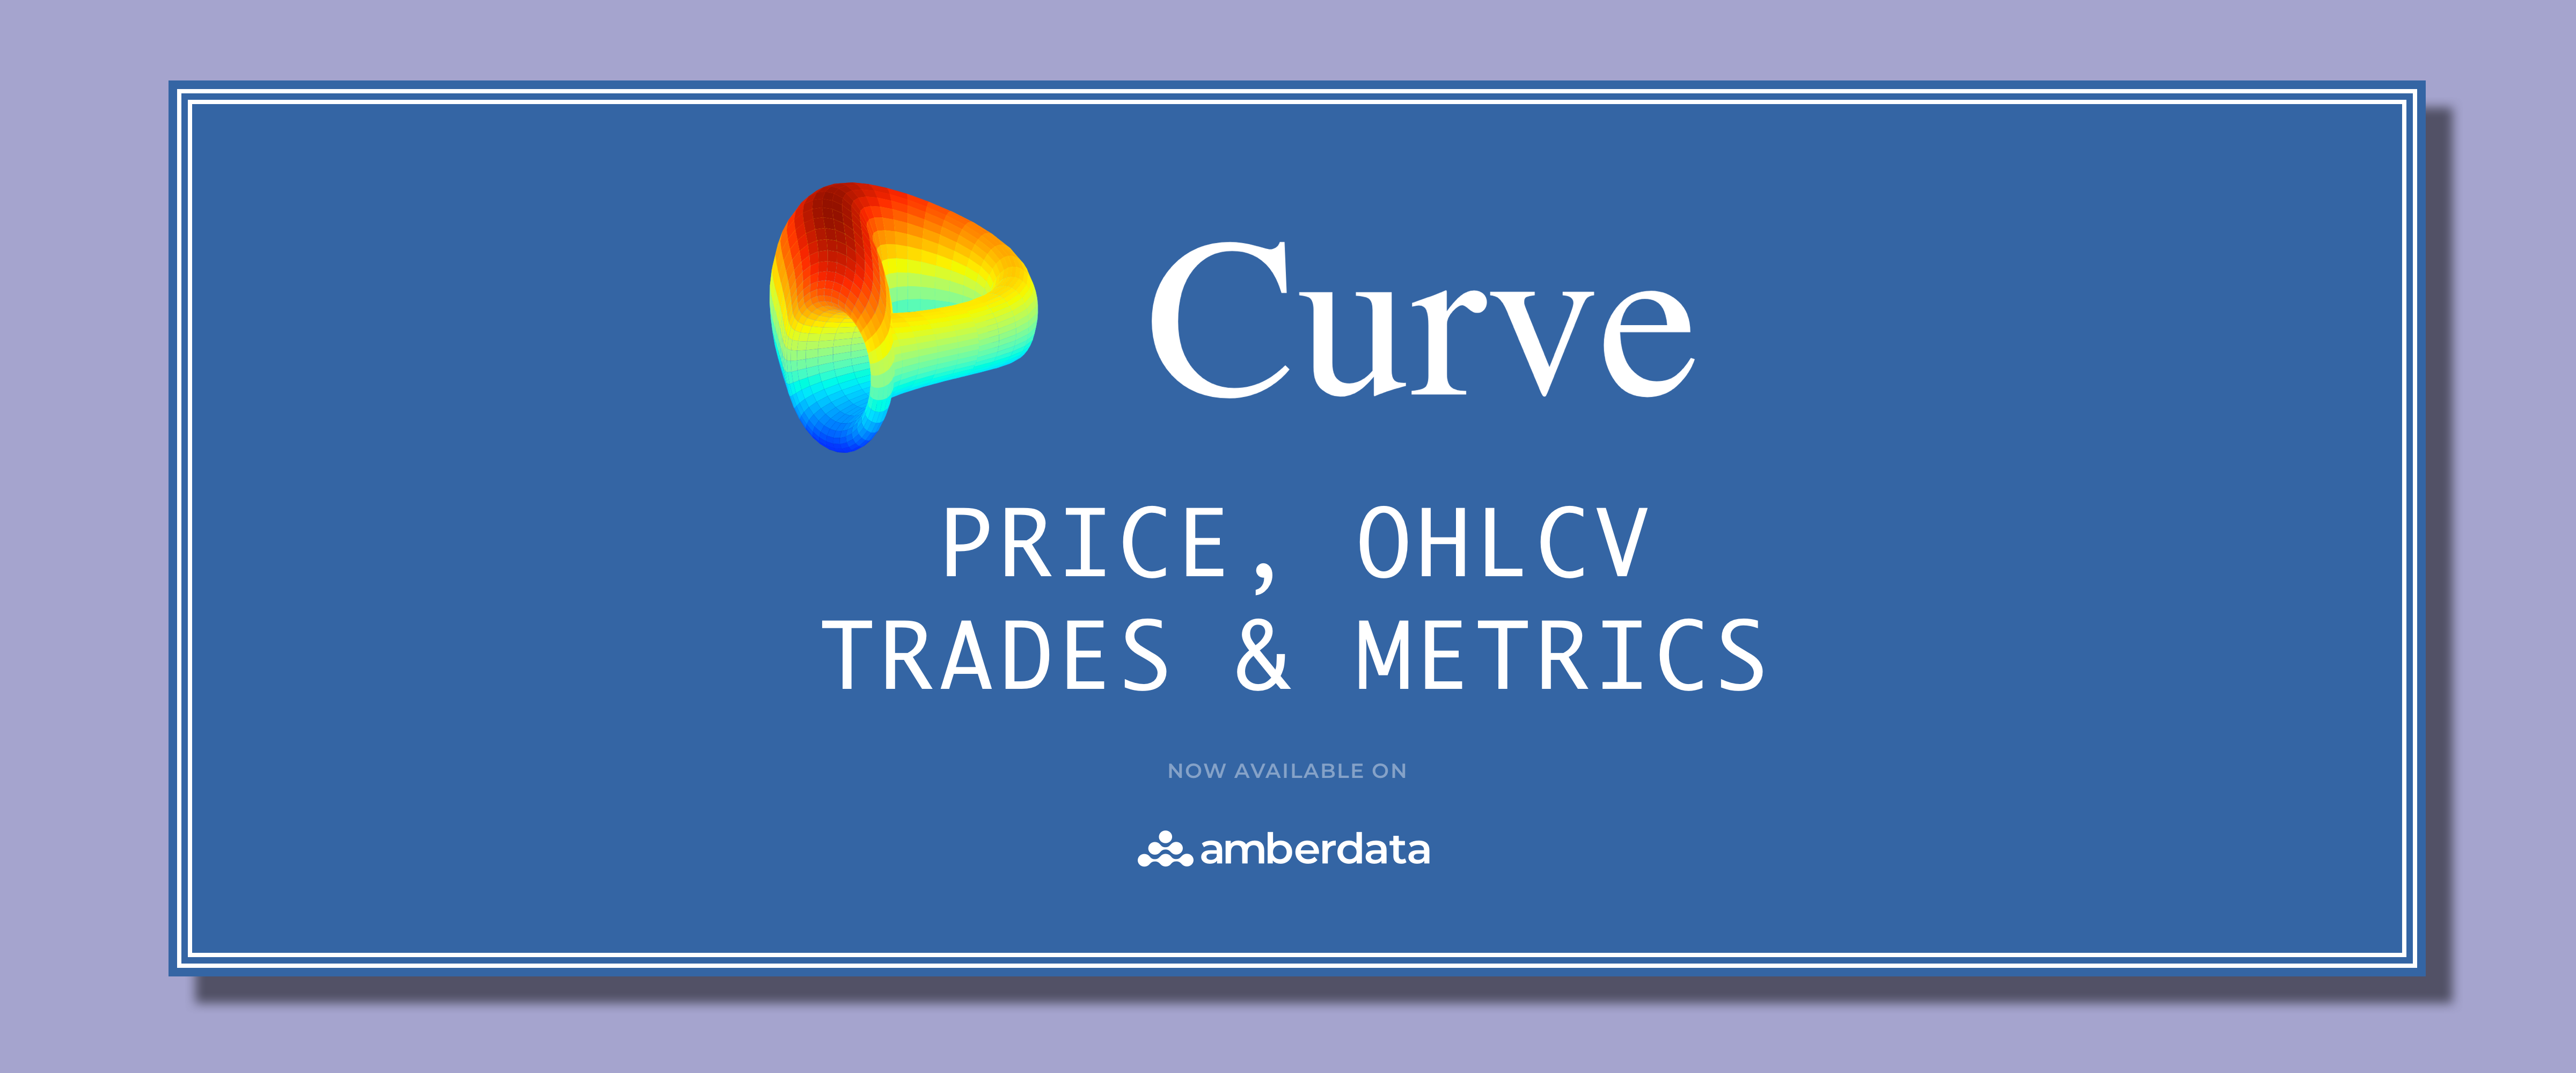 DeFi legend, Curve.fi, is now available in Amberdata APIs 🎉👏